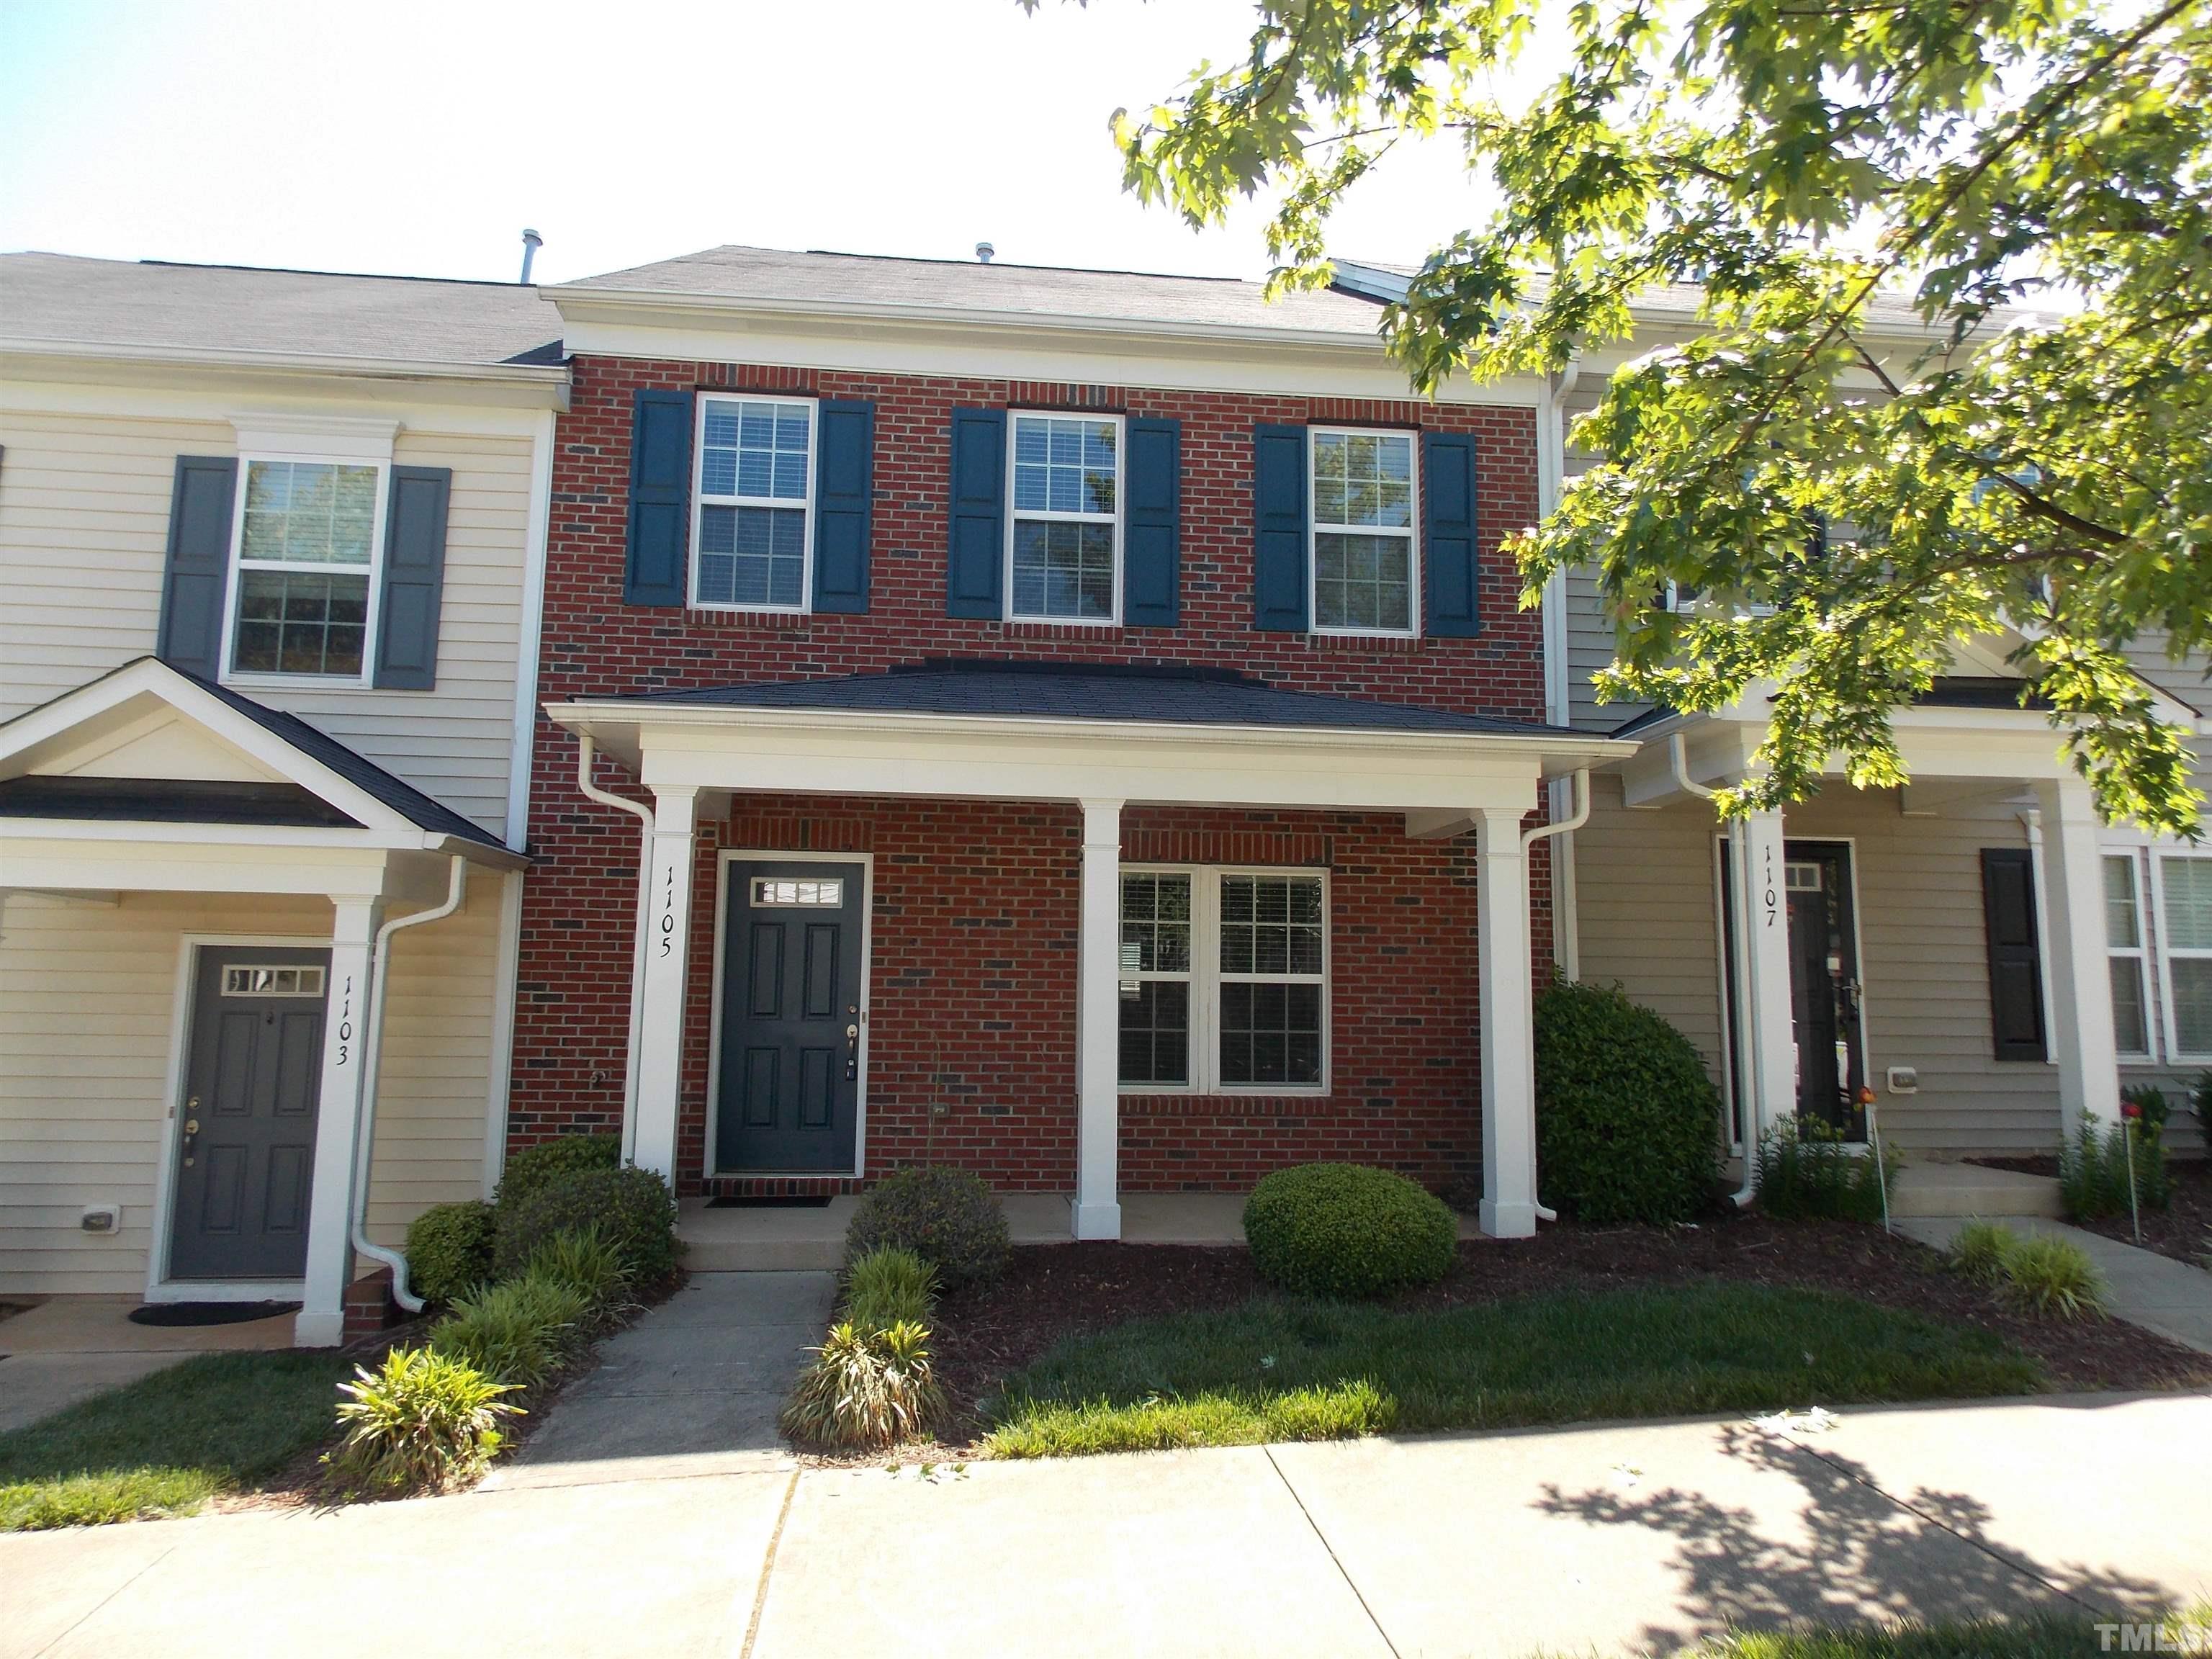 View Raleigh, NC 27603 townhome